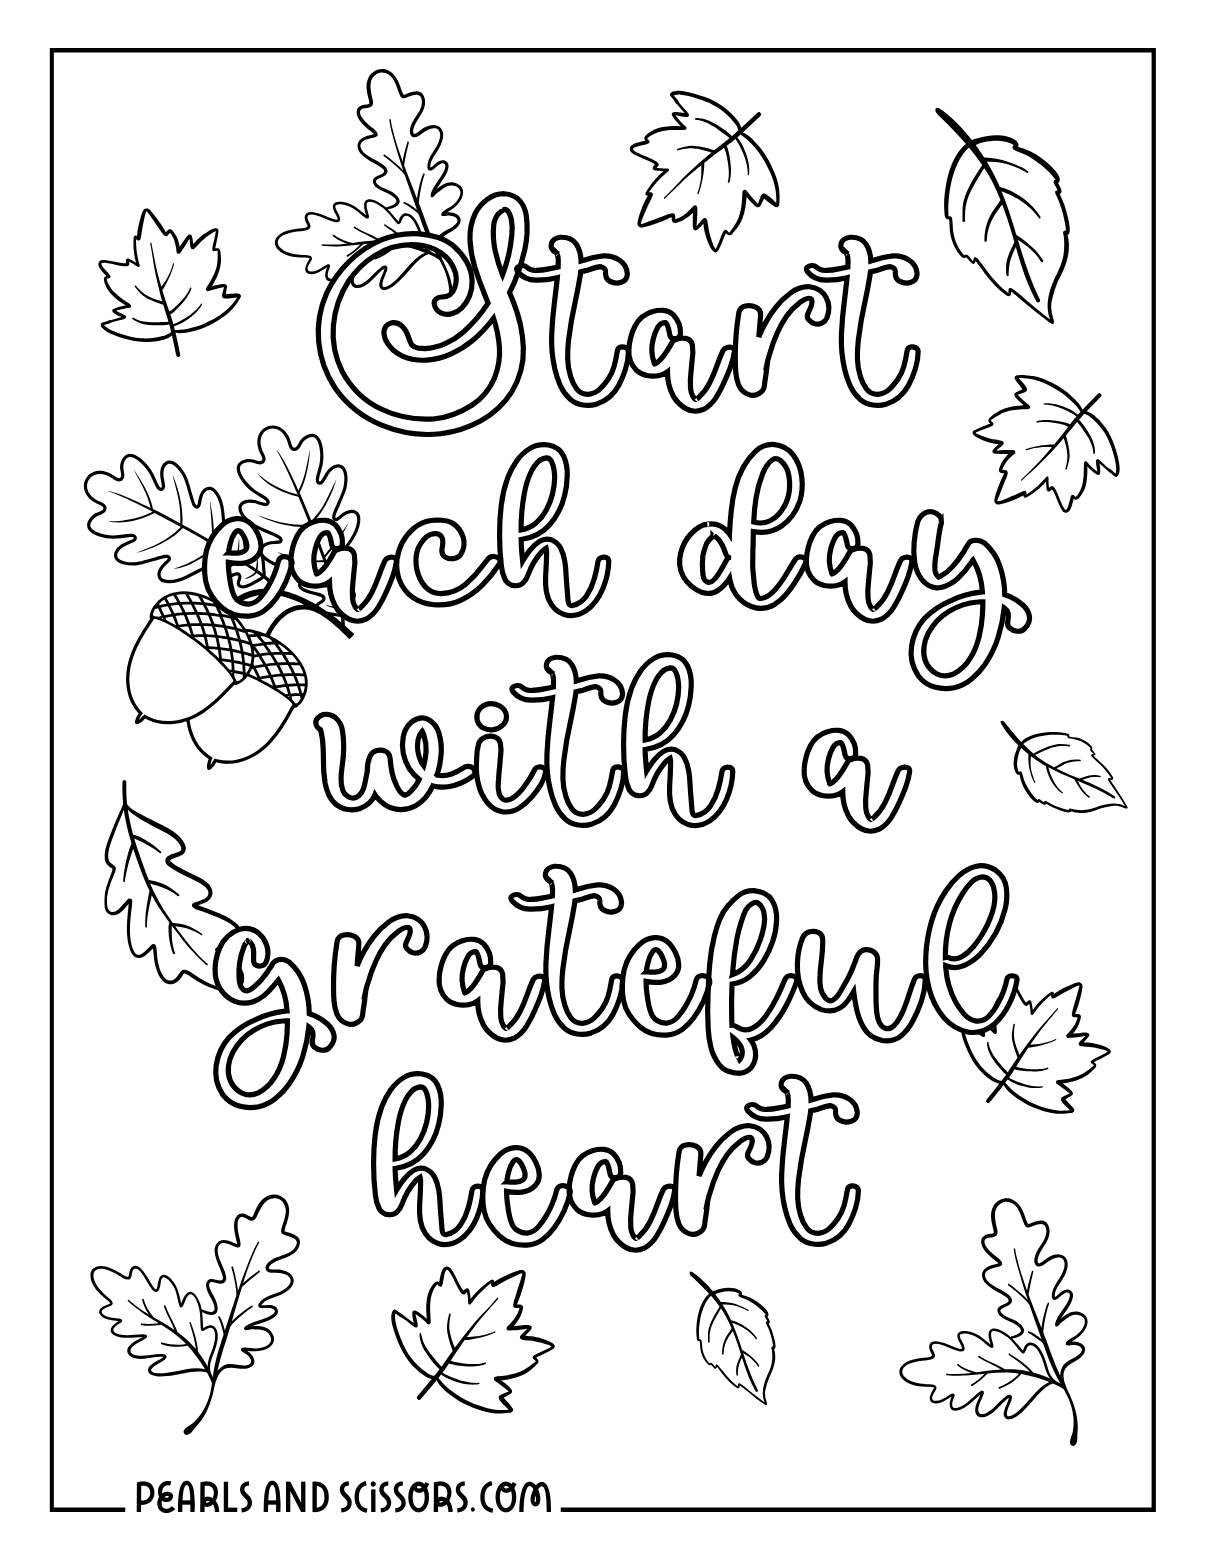 Thanksgiving gratitude quote coloring page for adults.